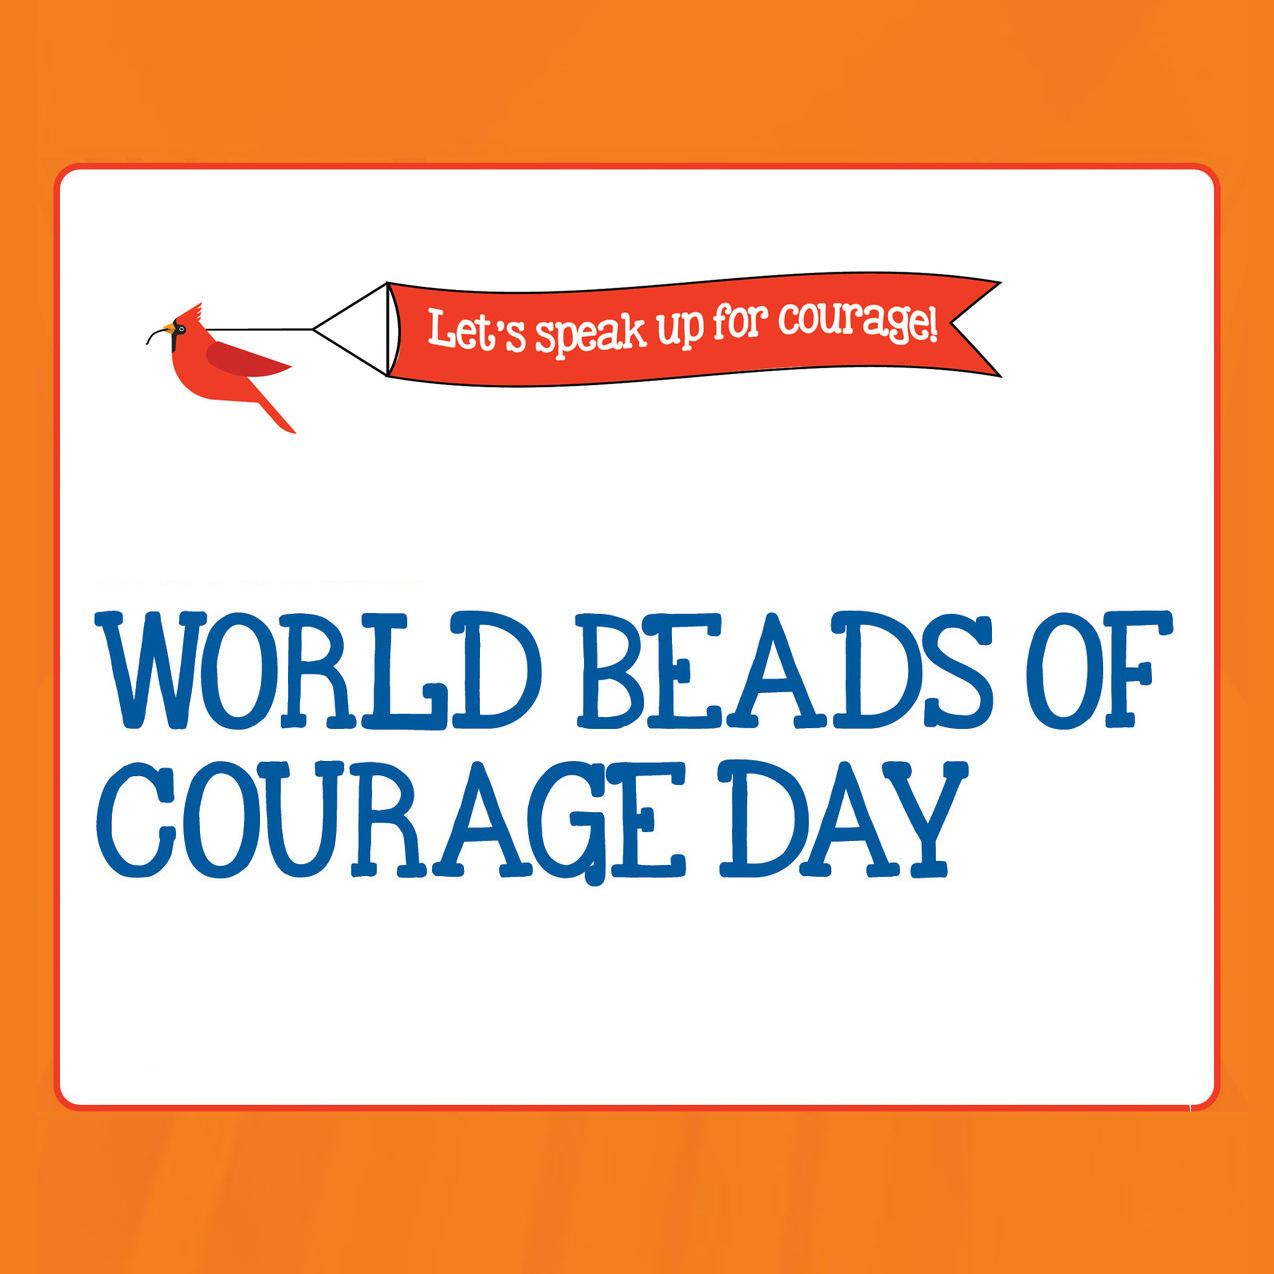 World Beads of Courage Day